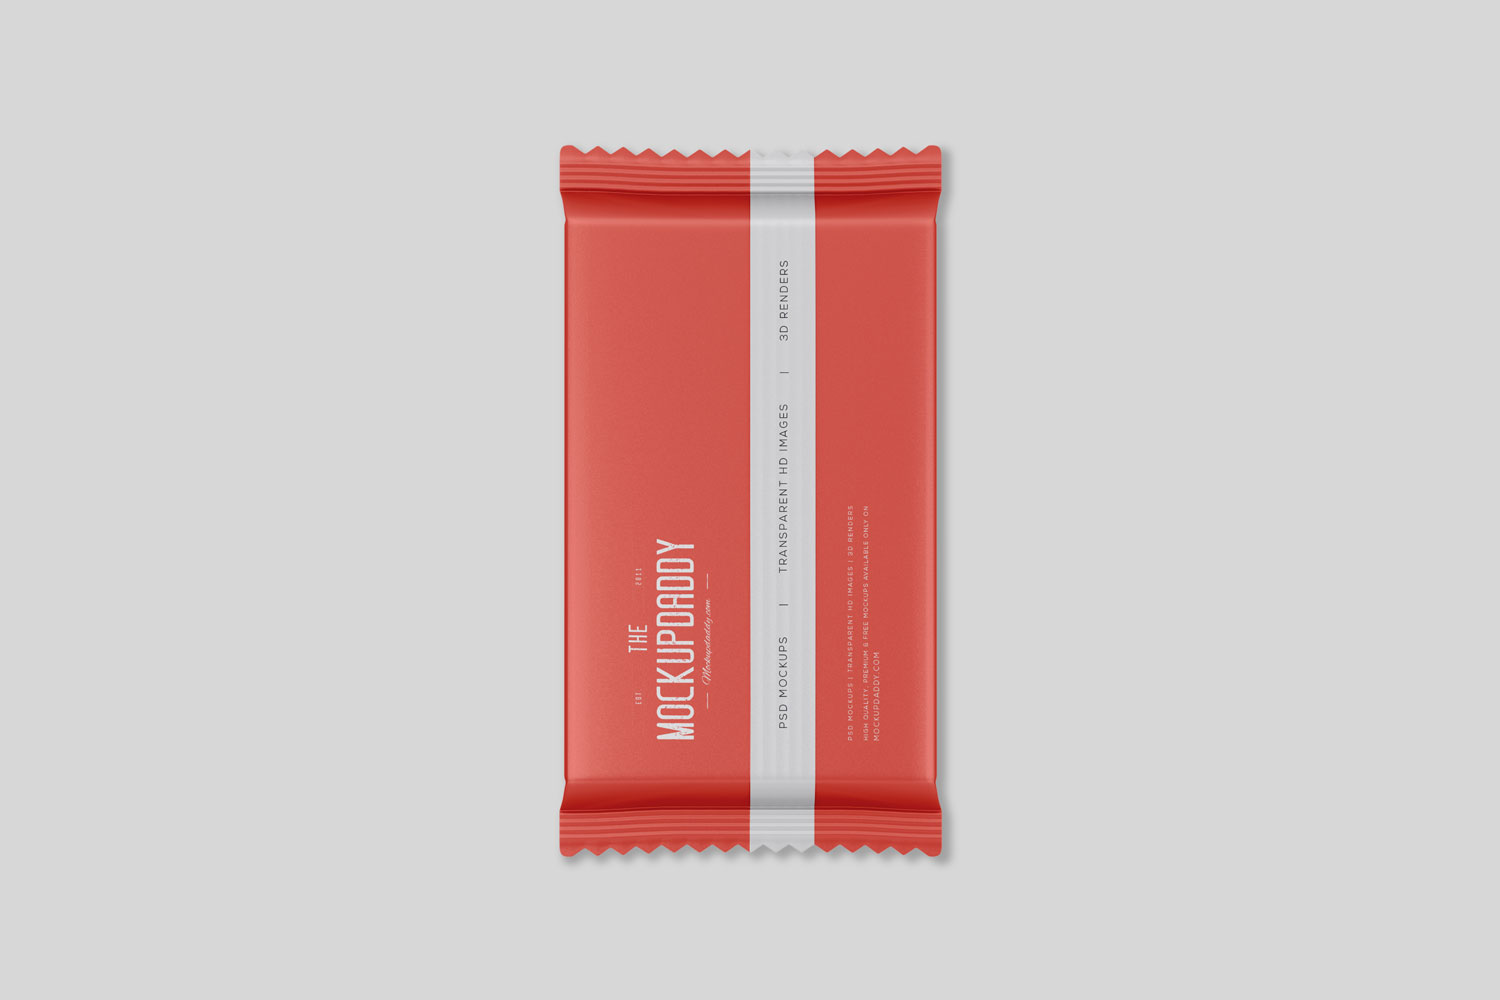  Chocolate Wrapper Mockup from the back side in red color.